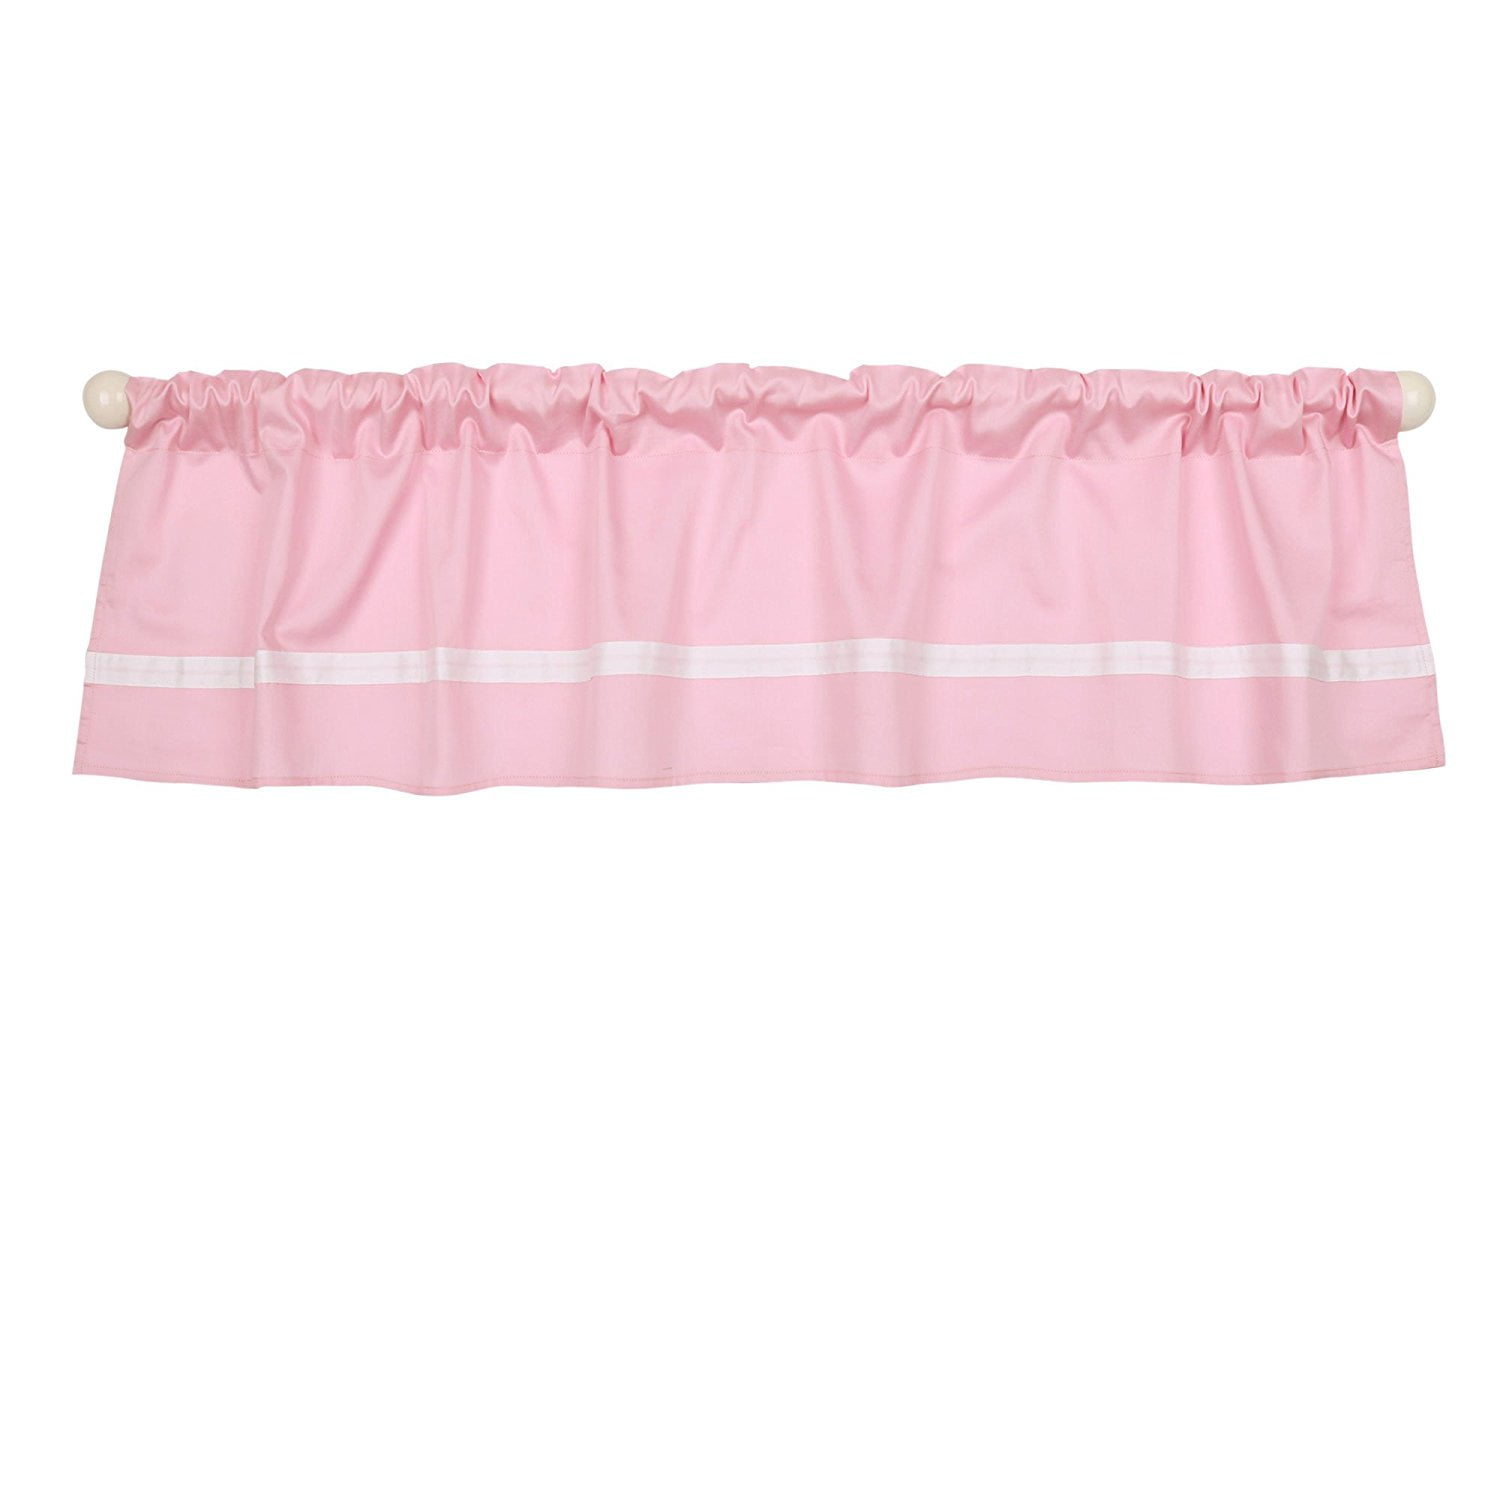 Pink Tailored Window Valance by The Peanut Shell 100% Cotton Sateen 